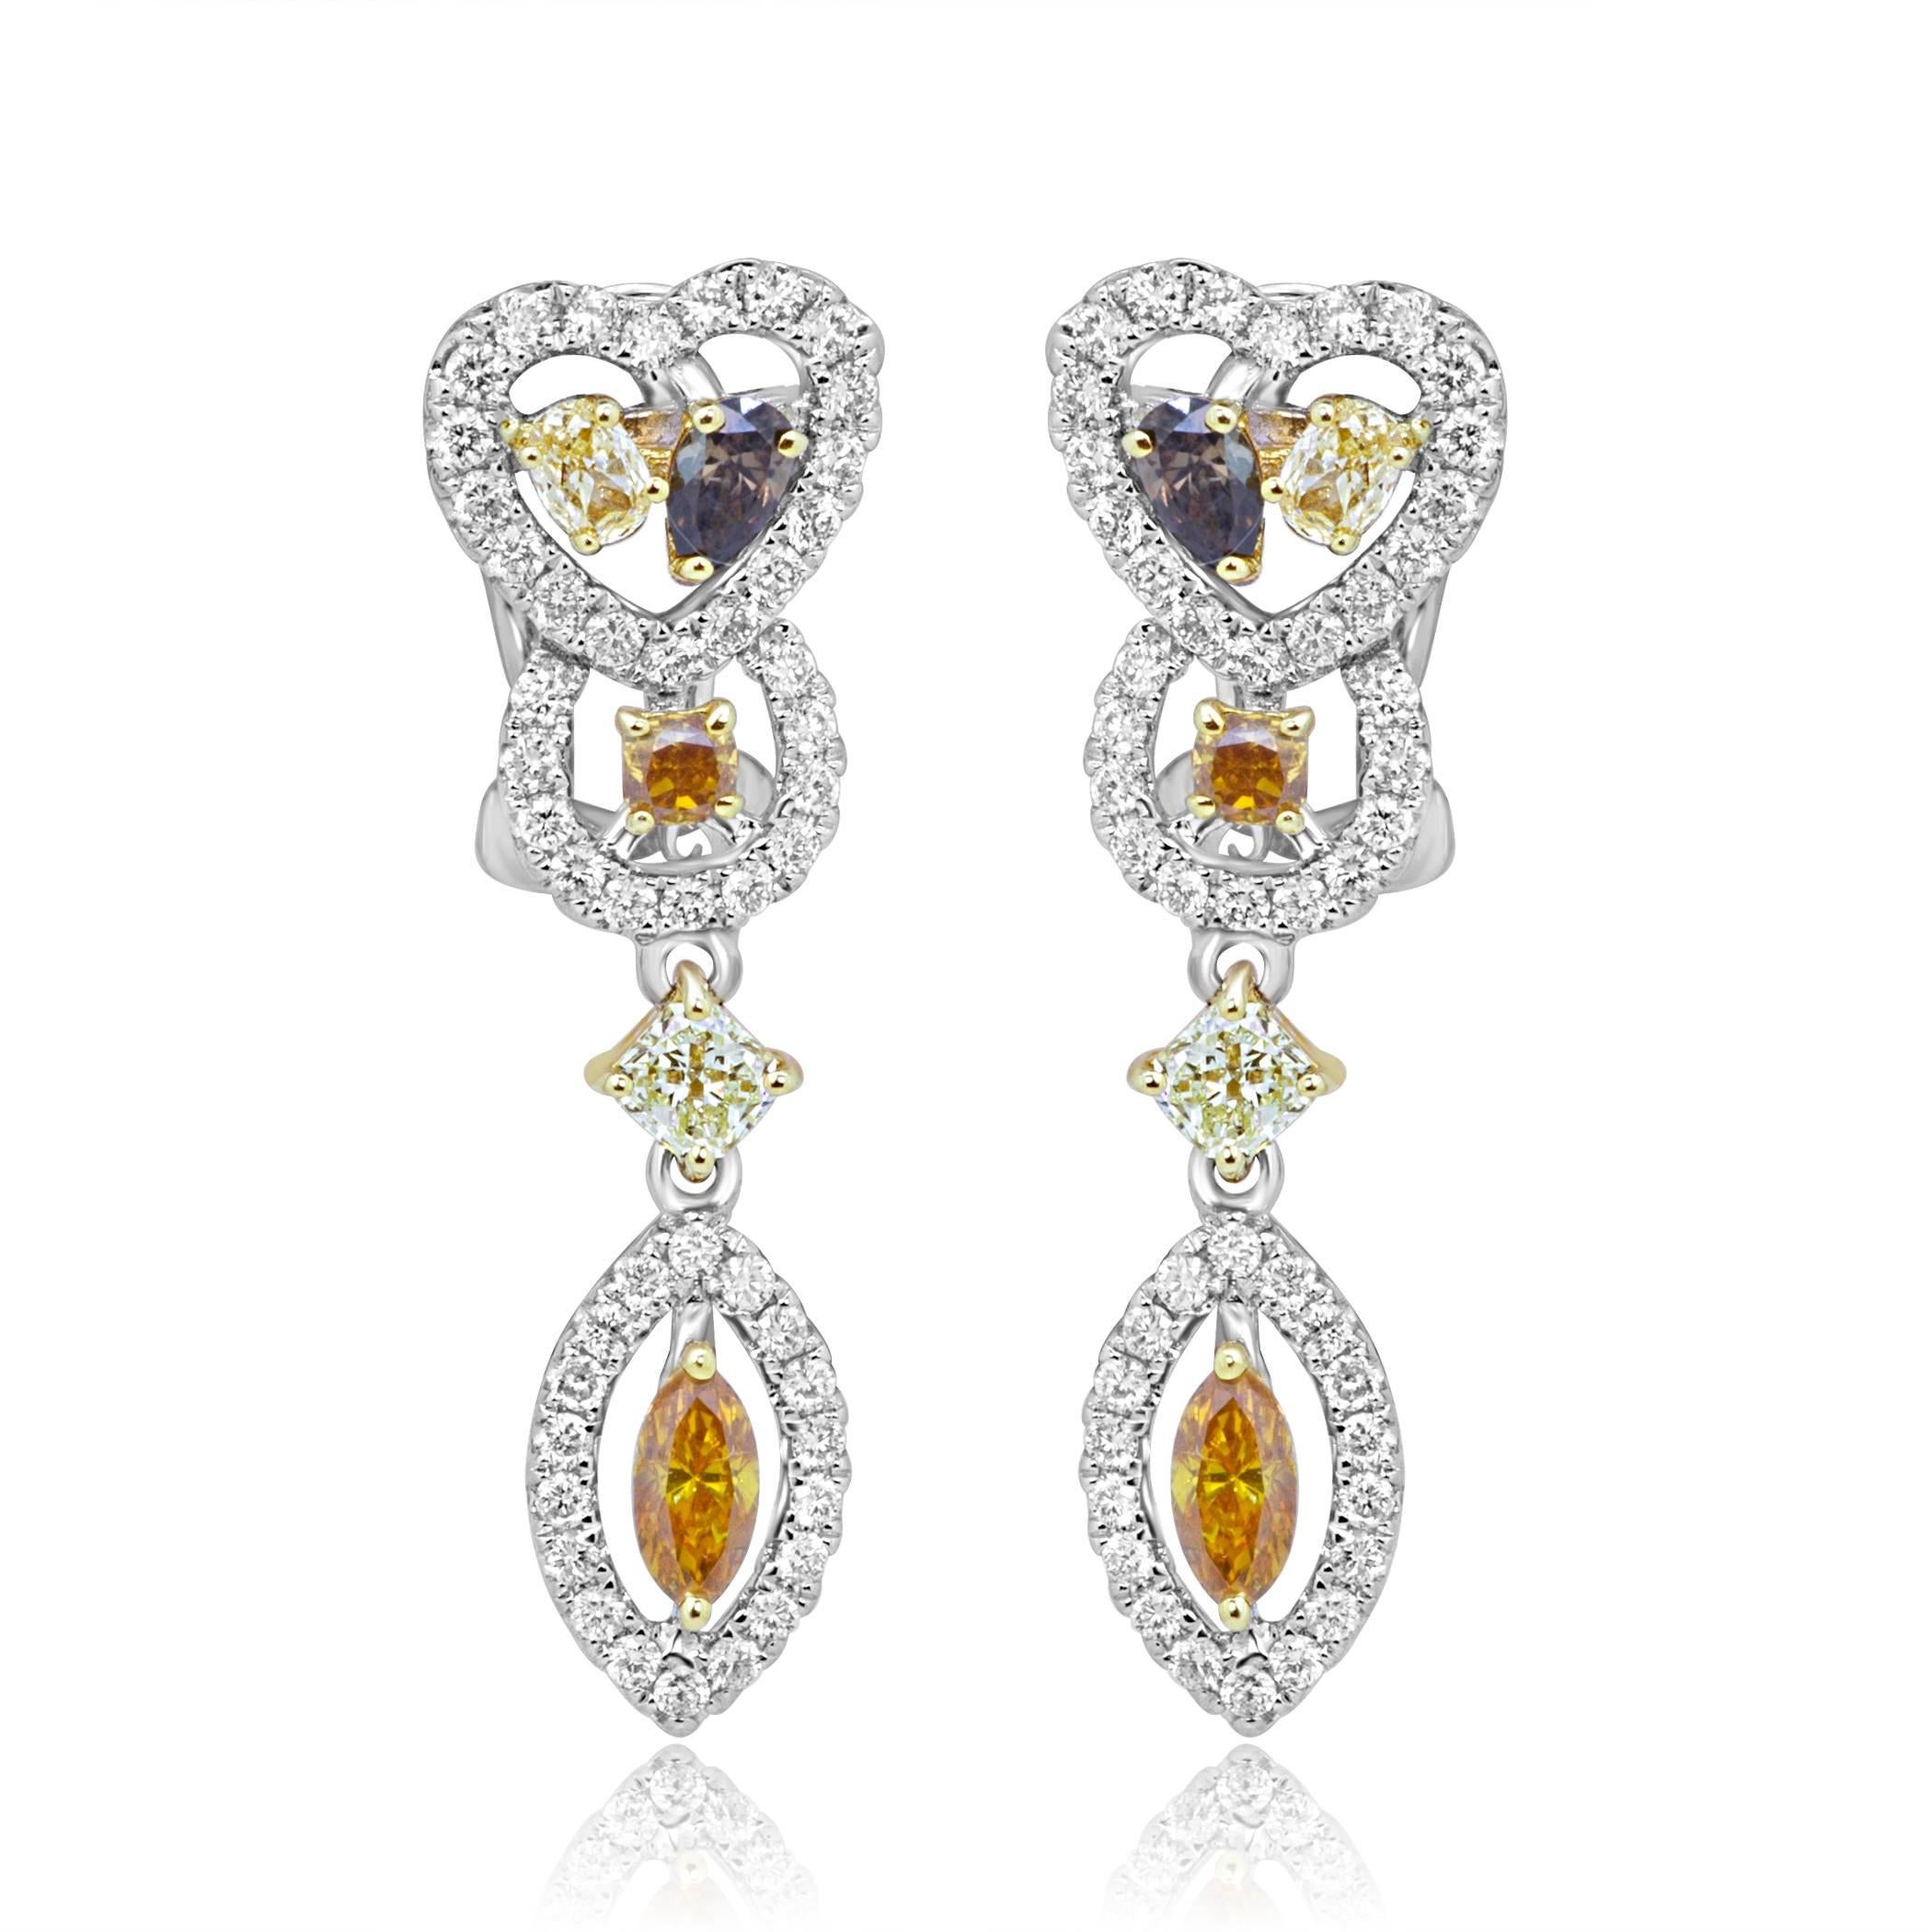 Beautiful 10 Multicolored and Mix Shapes Natural Fancy color Diamonds 1.31 Carat Encircled in a single Halo of White Round Diamonds 0.73 Carat in 18K White and Yellow Gold One of a Kind Earring.

Total Diamond Weight 2.04 Carat